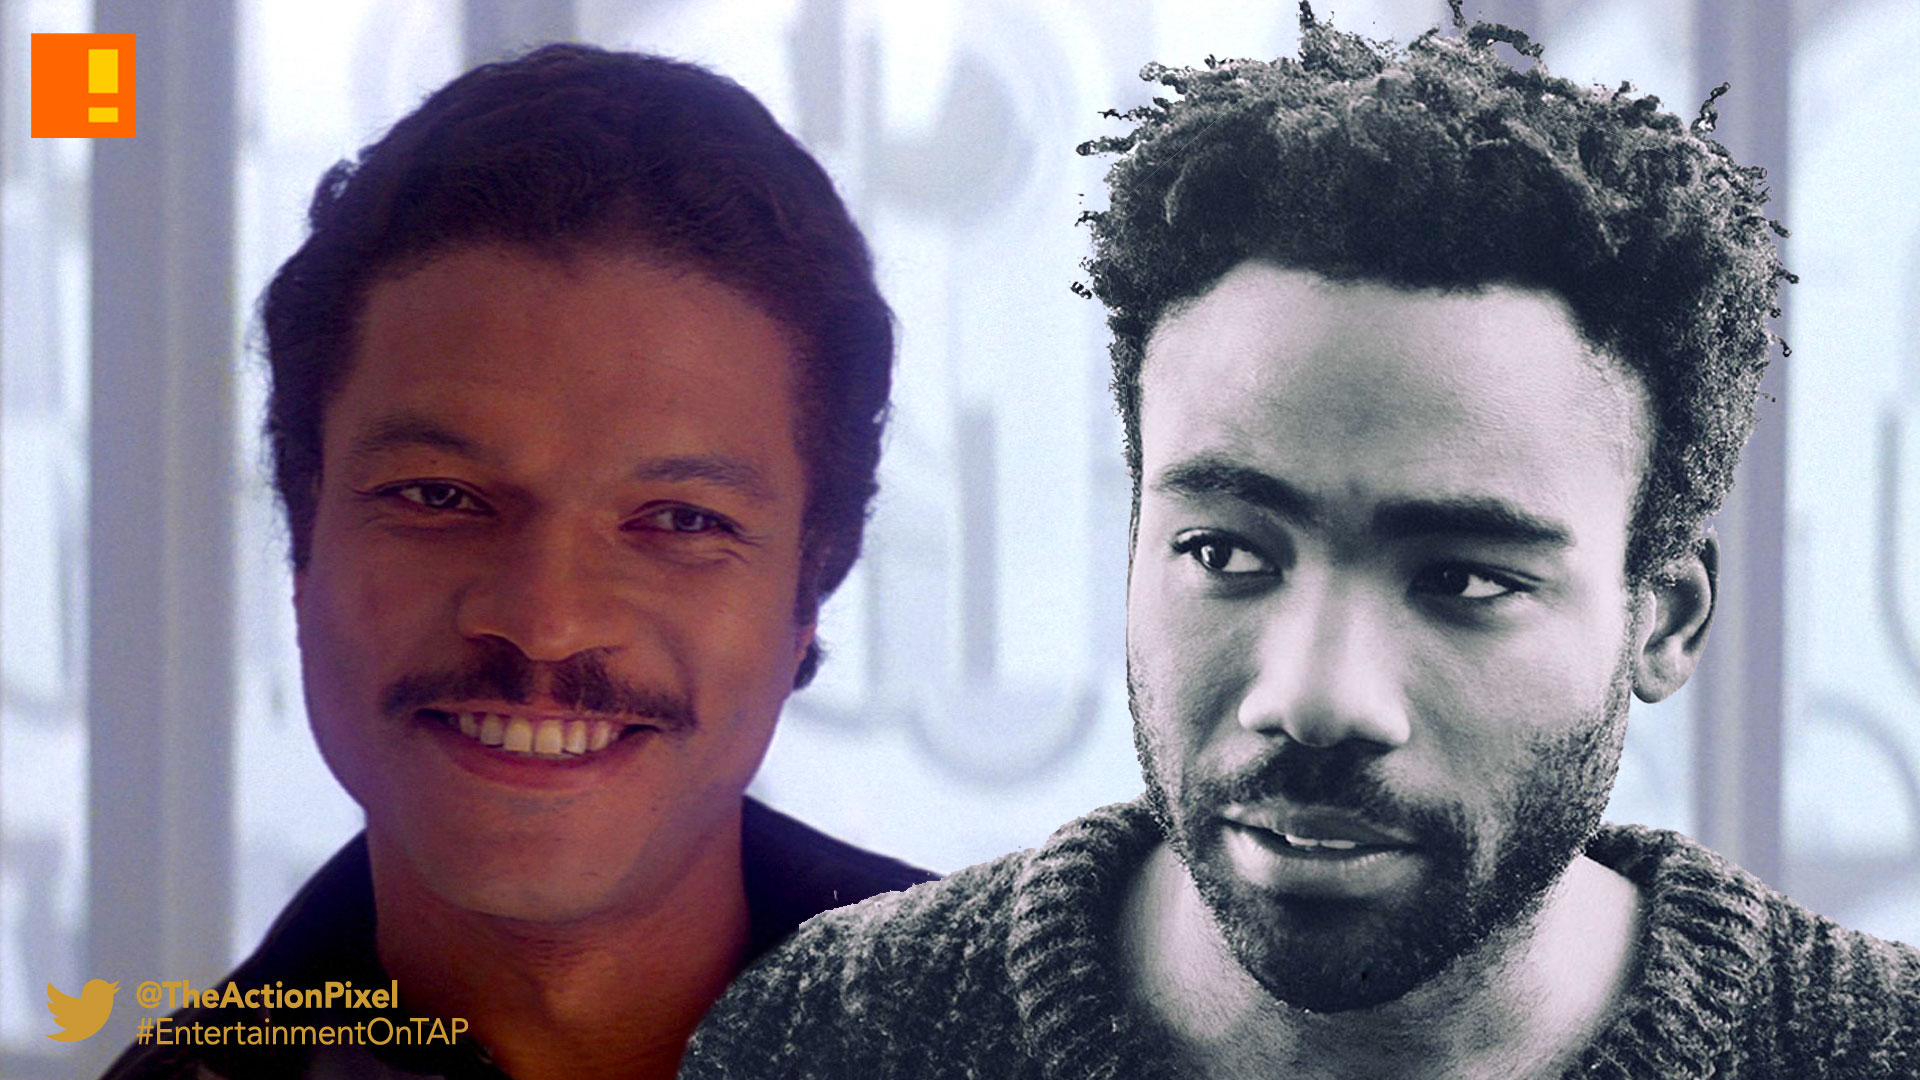 donald glover, lando, star wars, han solo, casting , the action pixel, entertainment on tap,disney, lucasfilm,